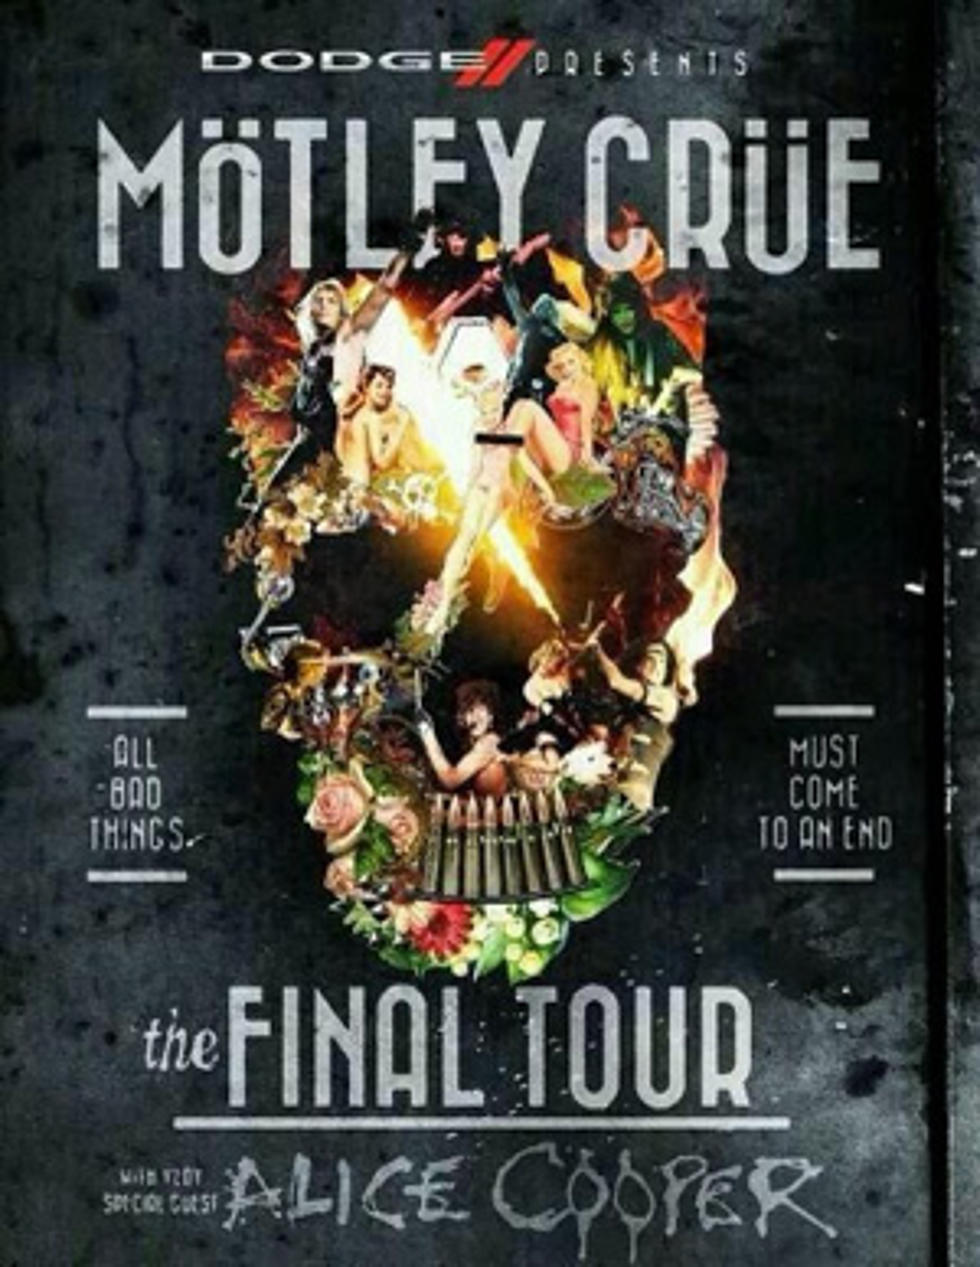 Motley Crue Adds Three Dates to The Final Tour, which Starts July 2 in Grand Rapids